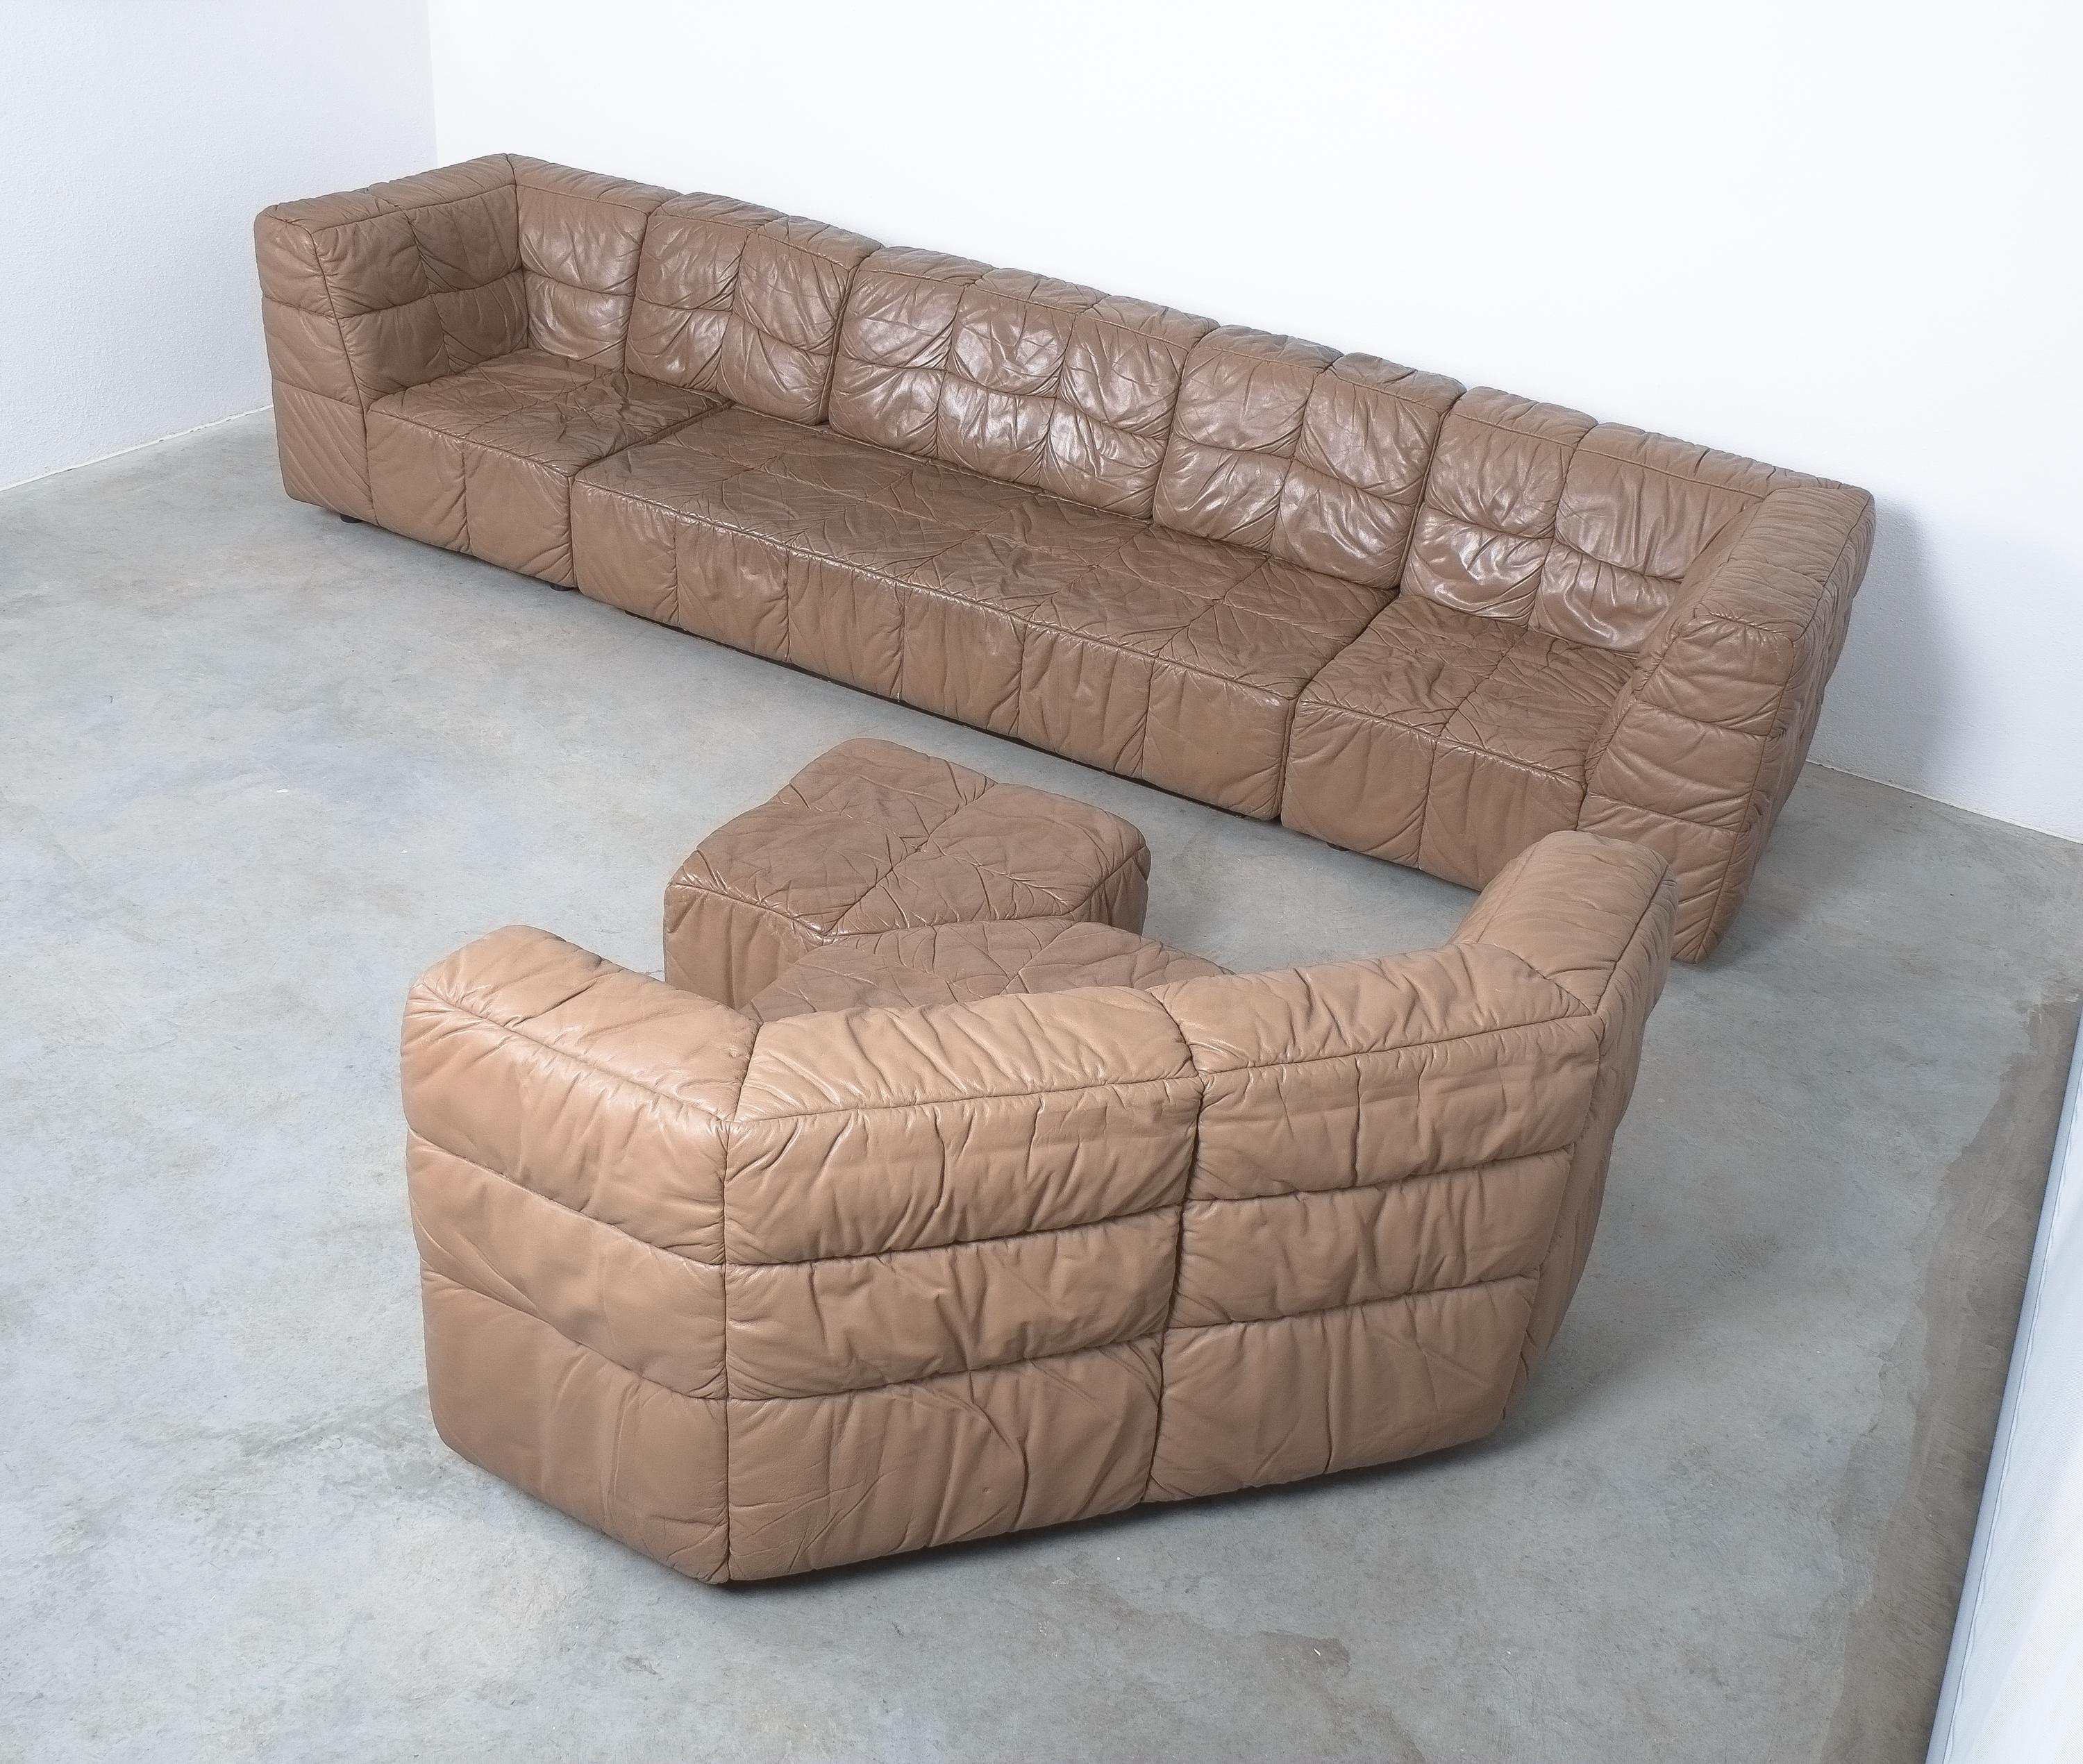 Rare 'Castell' leather sofa group by Hans Hopfer, Wiener Werkstätte, Austria, circa 1972

Well preserved sofa all in original vintage, super preserved condition. Normally these are destined to have been rather worn out throughout the last 50 years,